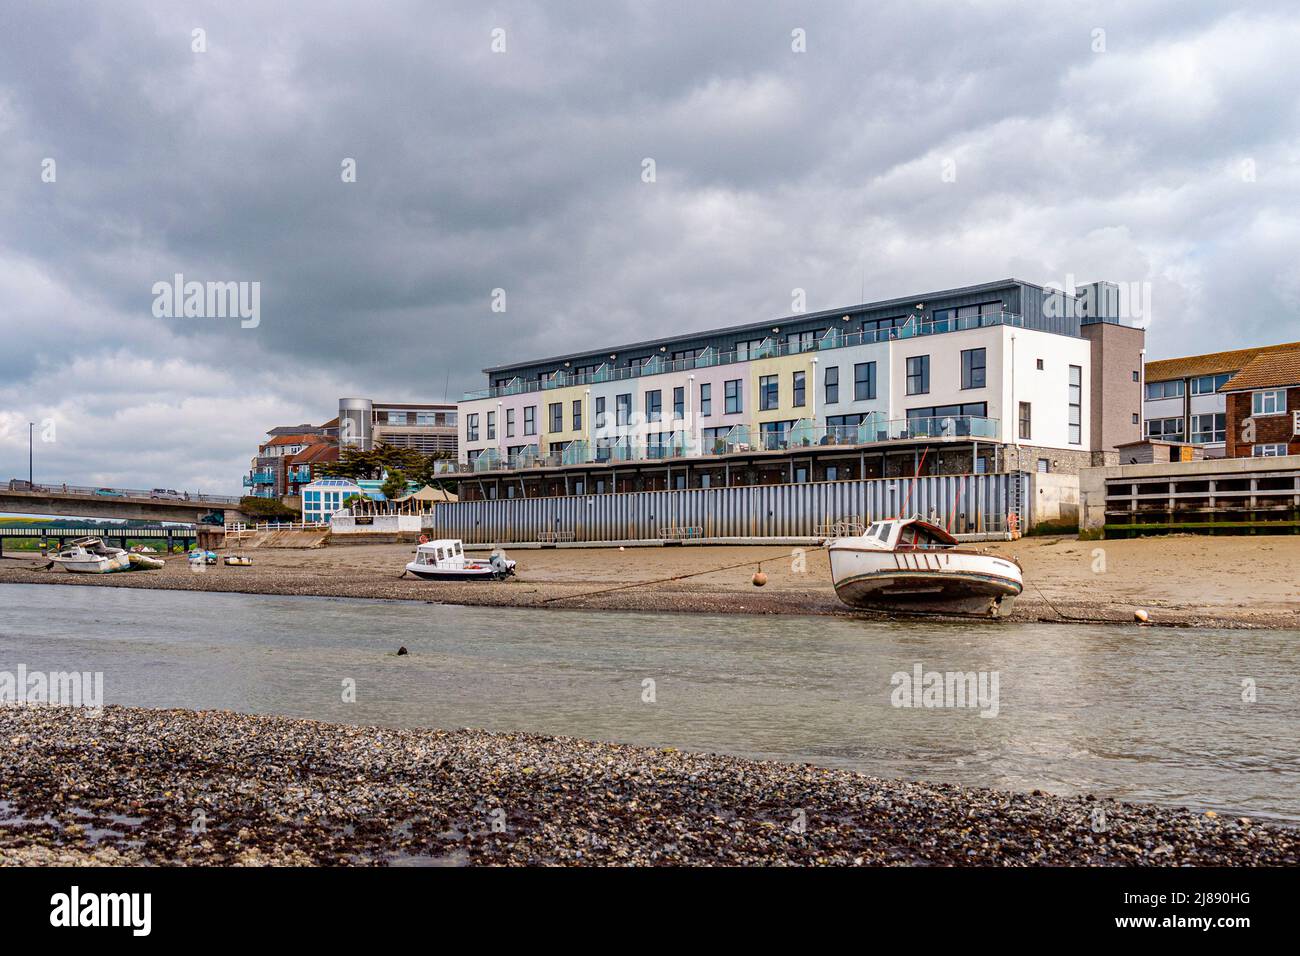 The River Adur at low tide revealing an extensive river bed and riverfront properties - Shoreham-By-Sea, West Sussex, UK. Stock Photo